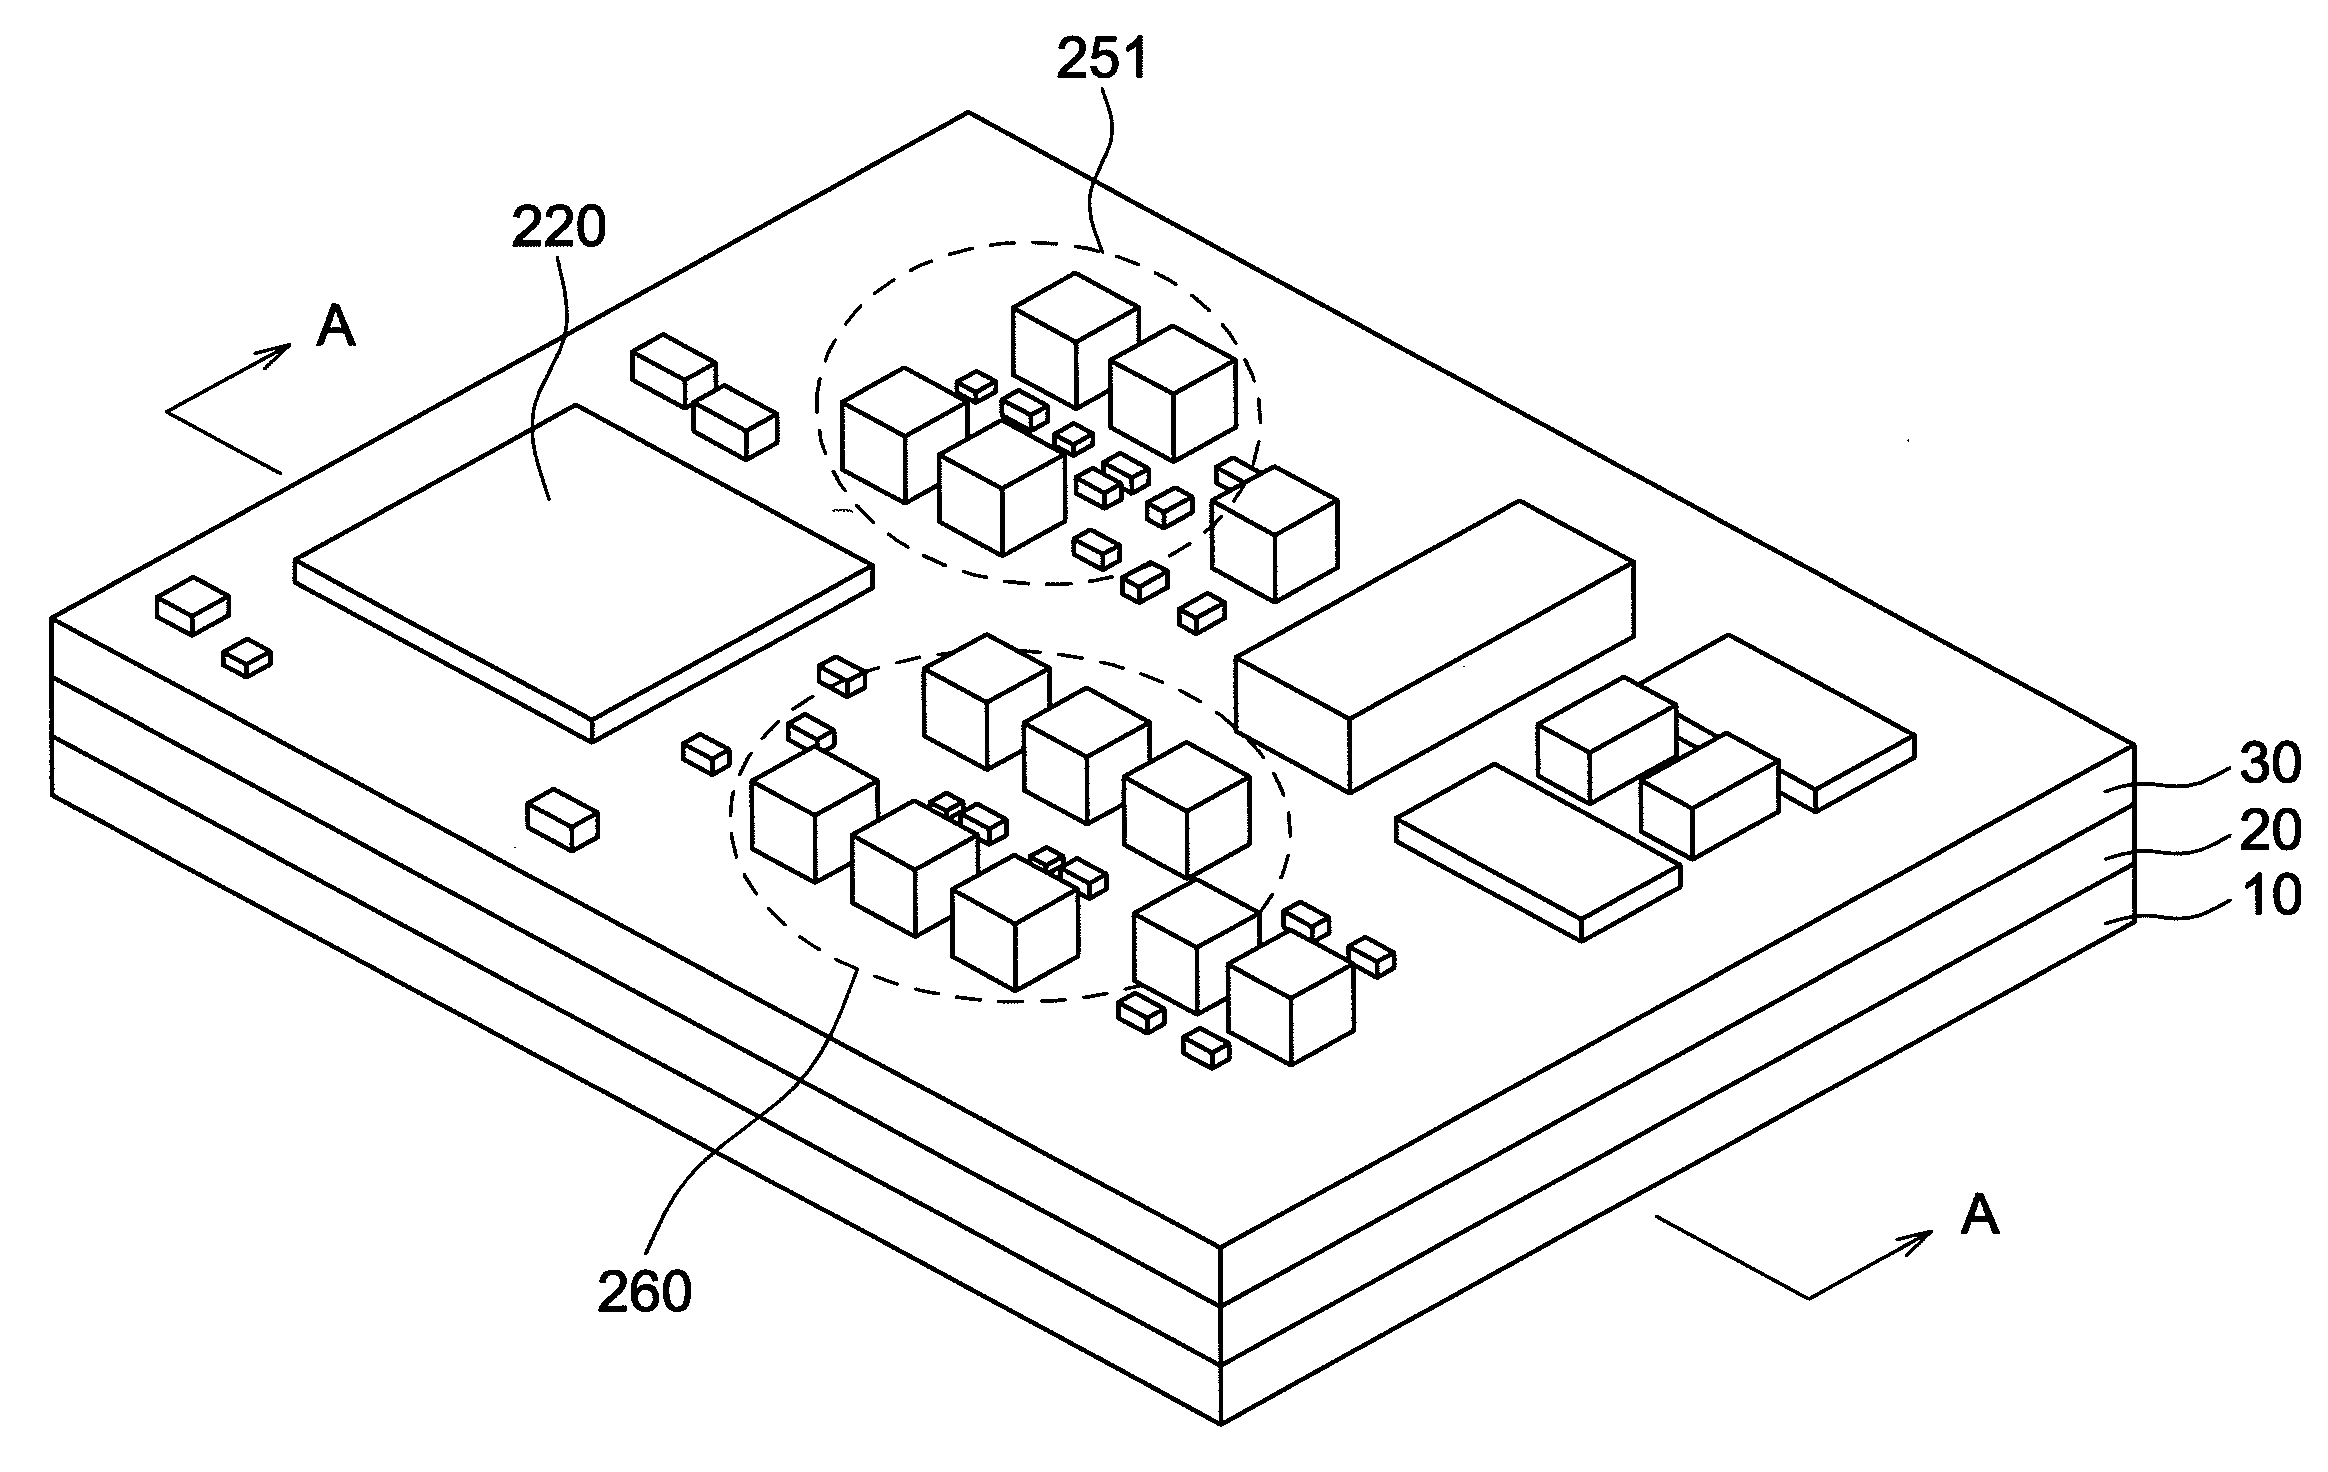 Circuit module and power line communication apparatus